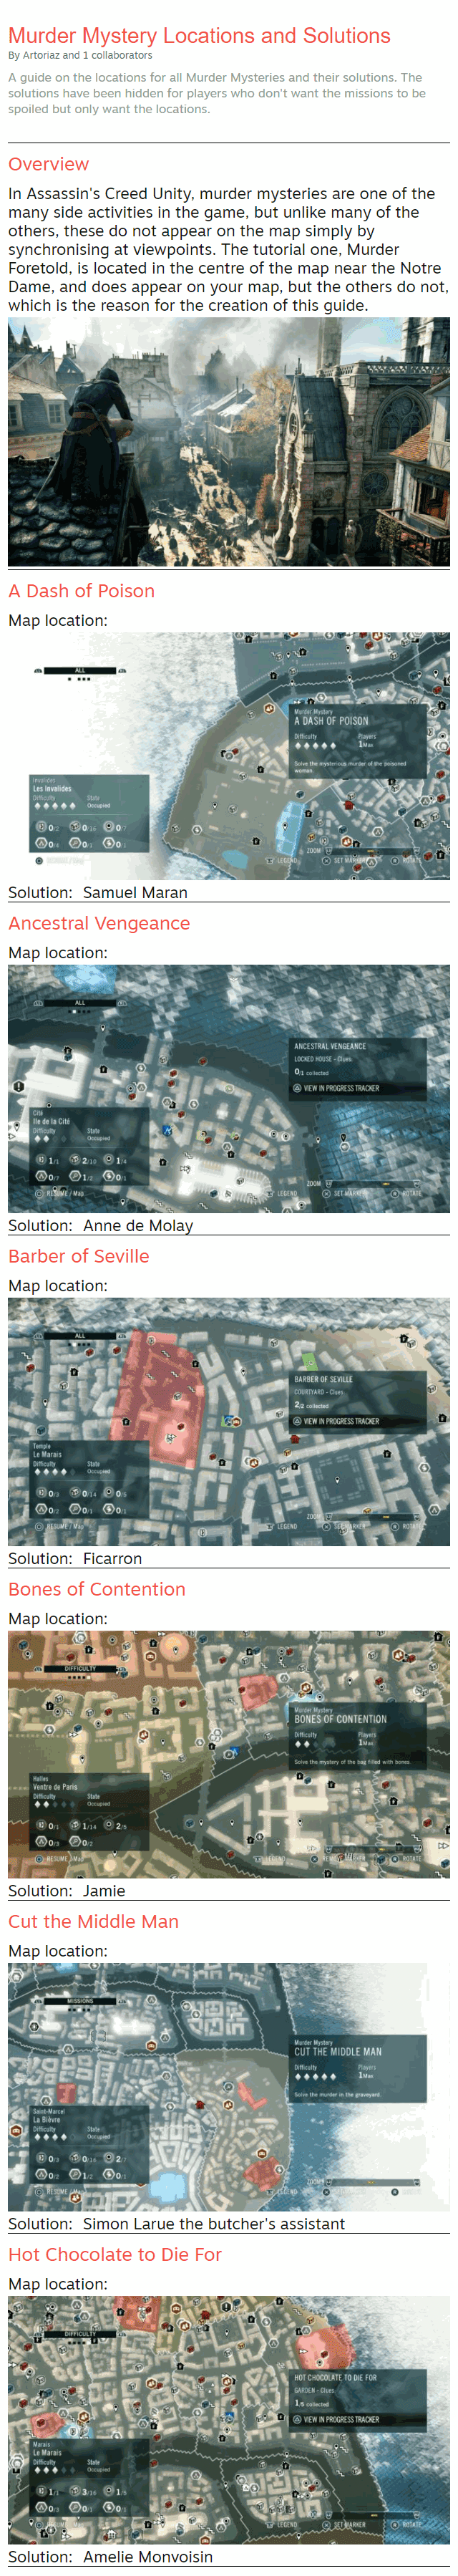 Murder Mystery Locations and Solutions By Artoriaz and 1 collaborators A guide on the locations for all Murder Mysteries and their solutions. The solutions have been hidden for players who don't want the missions to be spoiled but only want the locations. Overview In Assassin's Creed Unity, murder mysteries are one of the many side activities in the game, but unlike many of the others, these do not appear on the map simply by synchronising at viewpoints. The tutorial one, Murder Foretold, is located in the centre of the map near the Notre Dame, and does appear on your map, but the others do not, which is the reason for the creation of this guide.  A Dash of Poison Map location: Solution: Samuel Maran Ancestral Vengeance Map location: Solution: Anne de Molay Barber of Seville Map location: Solution: Ficarron Bones of Contention Map location: Solution: Jamie Cut the Middle Man Map location: Solution: Simon Larue the butcher's assistant Hot Chocolate to Die For